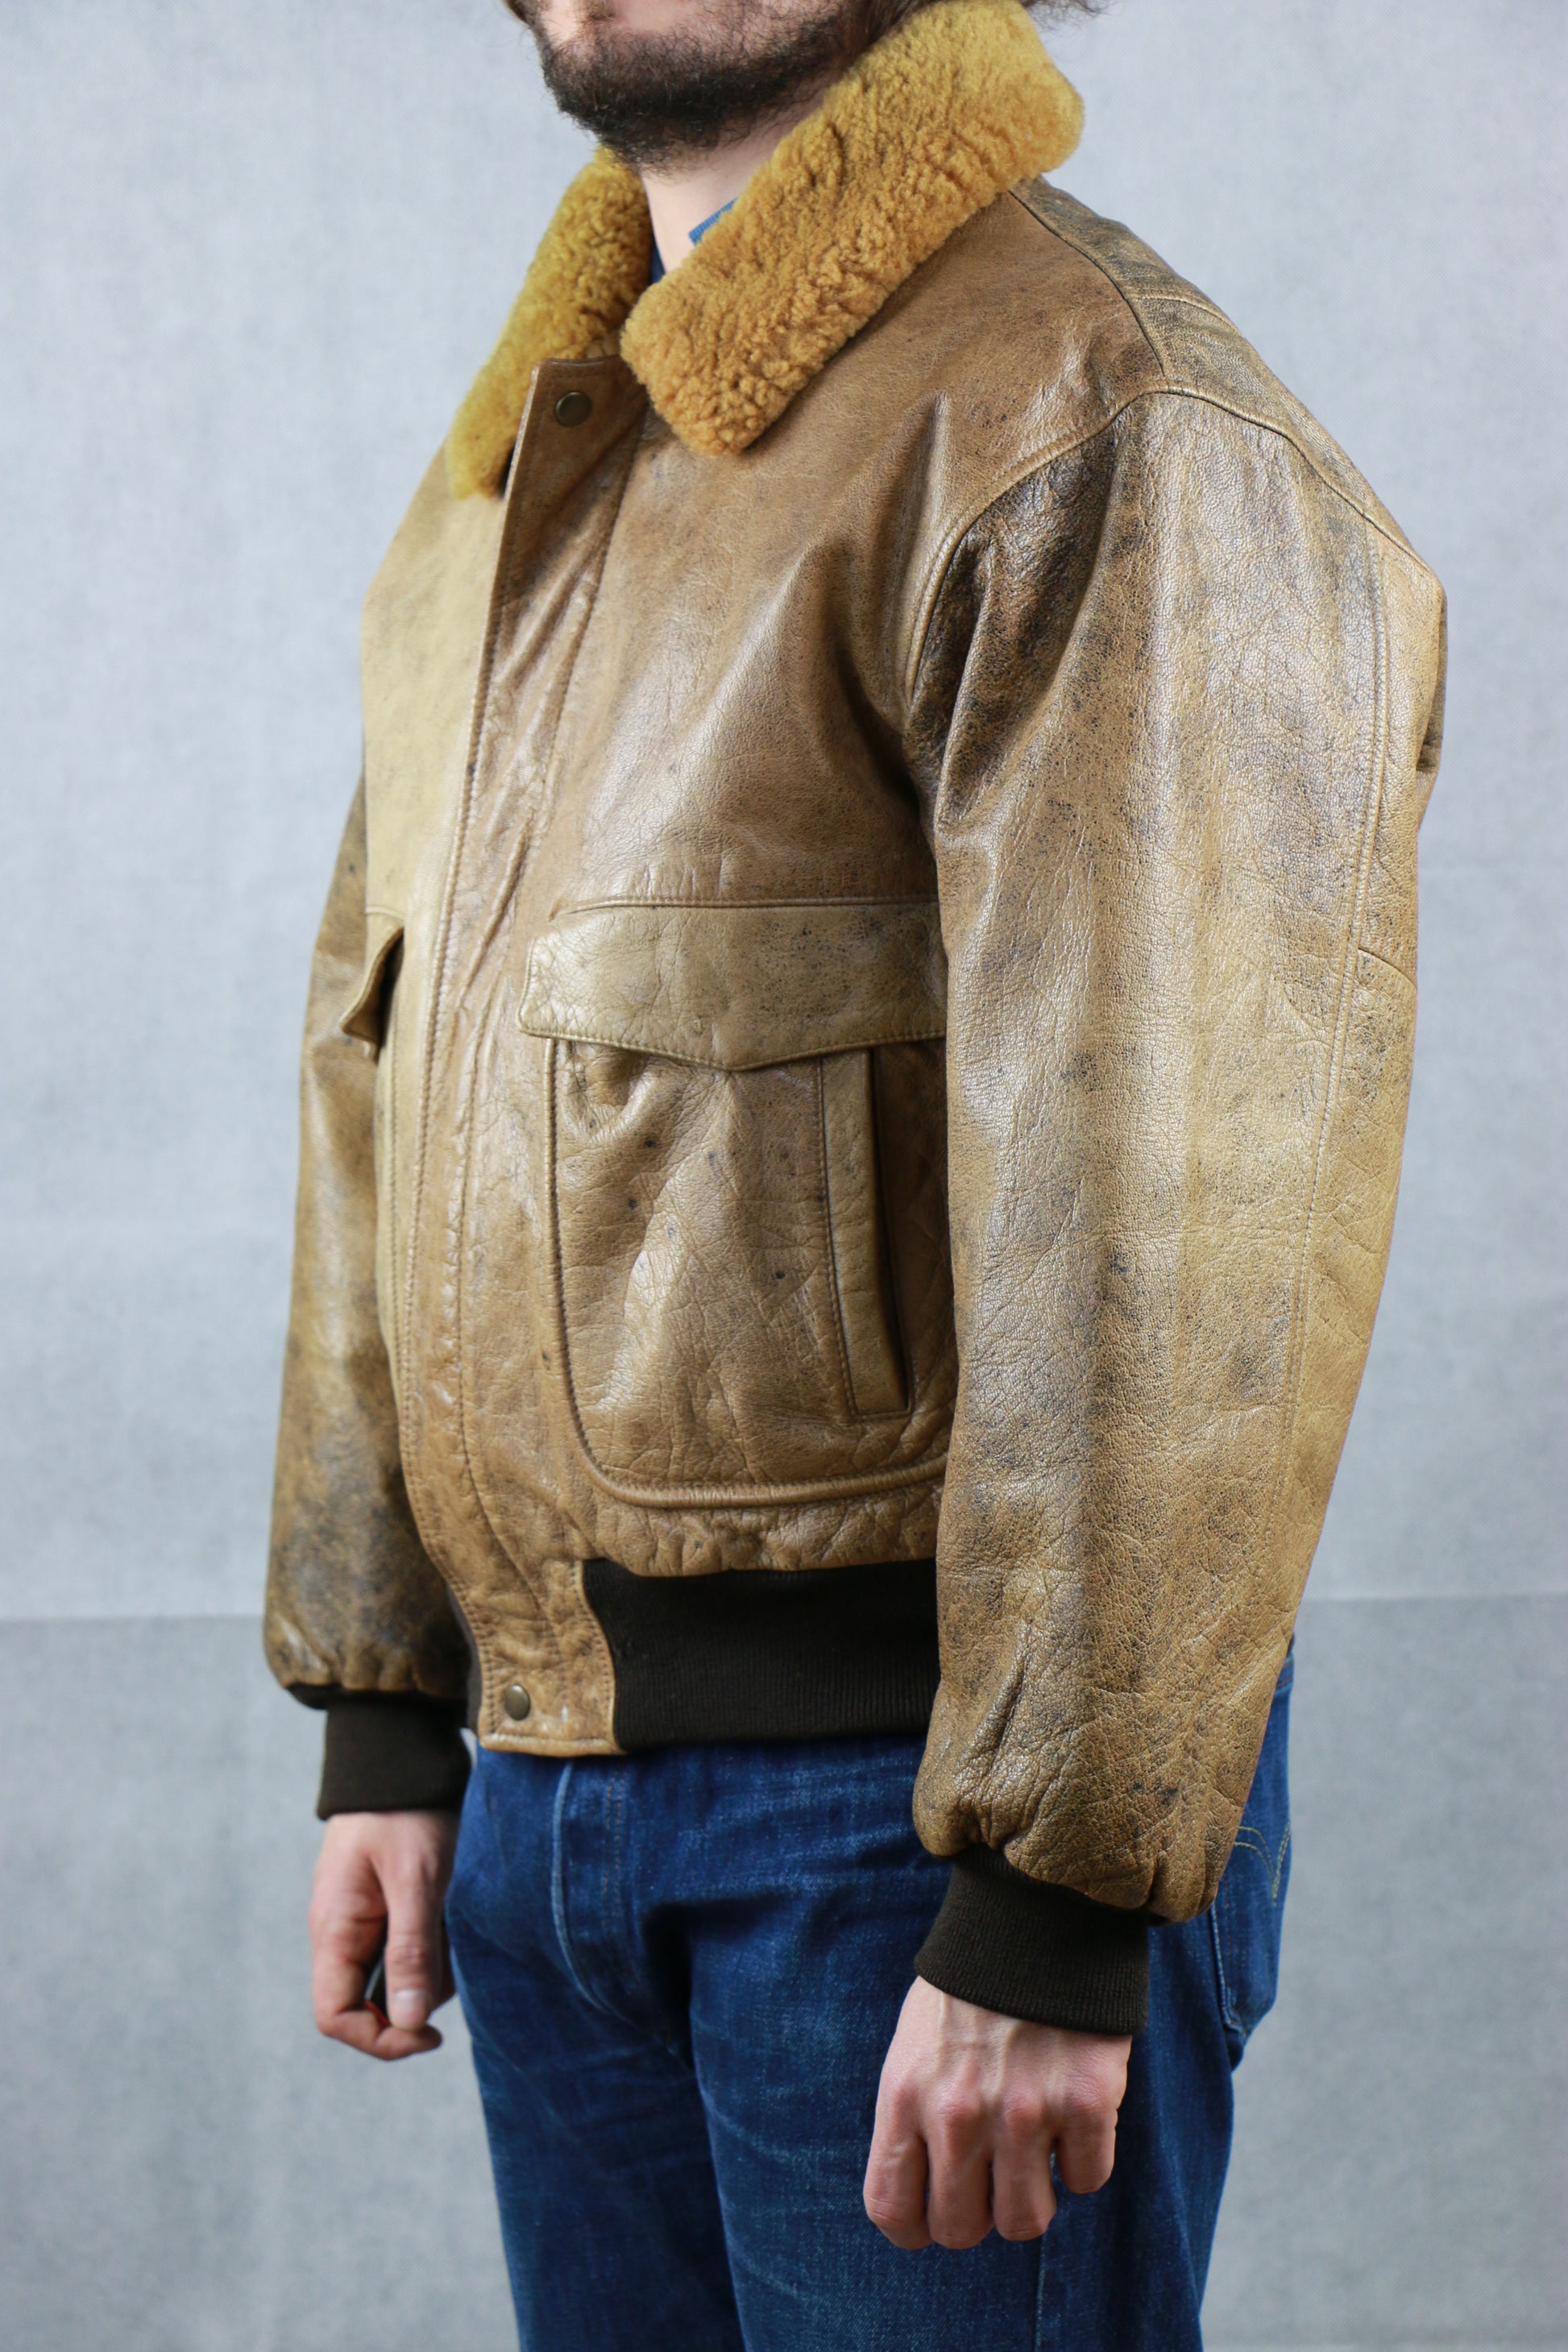 A-2 Leather Jacket with shearling collar - vintage clothing clochard92.com